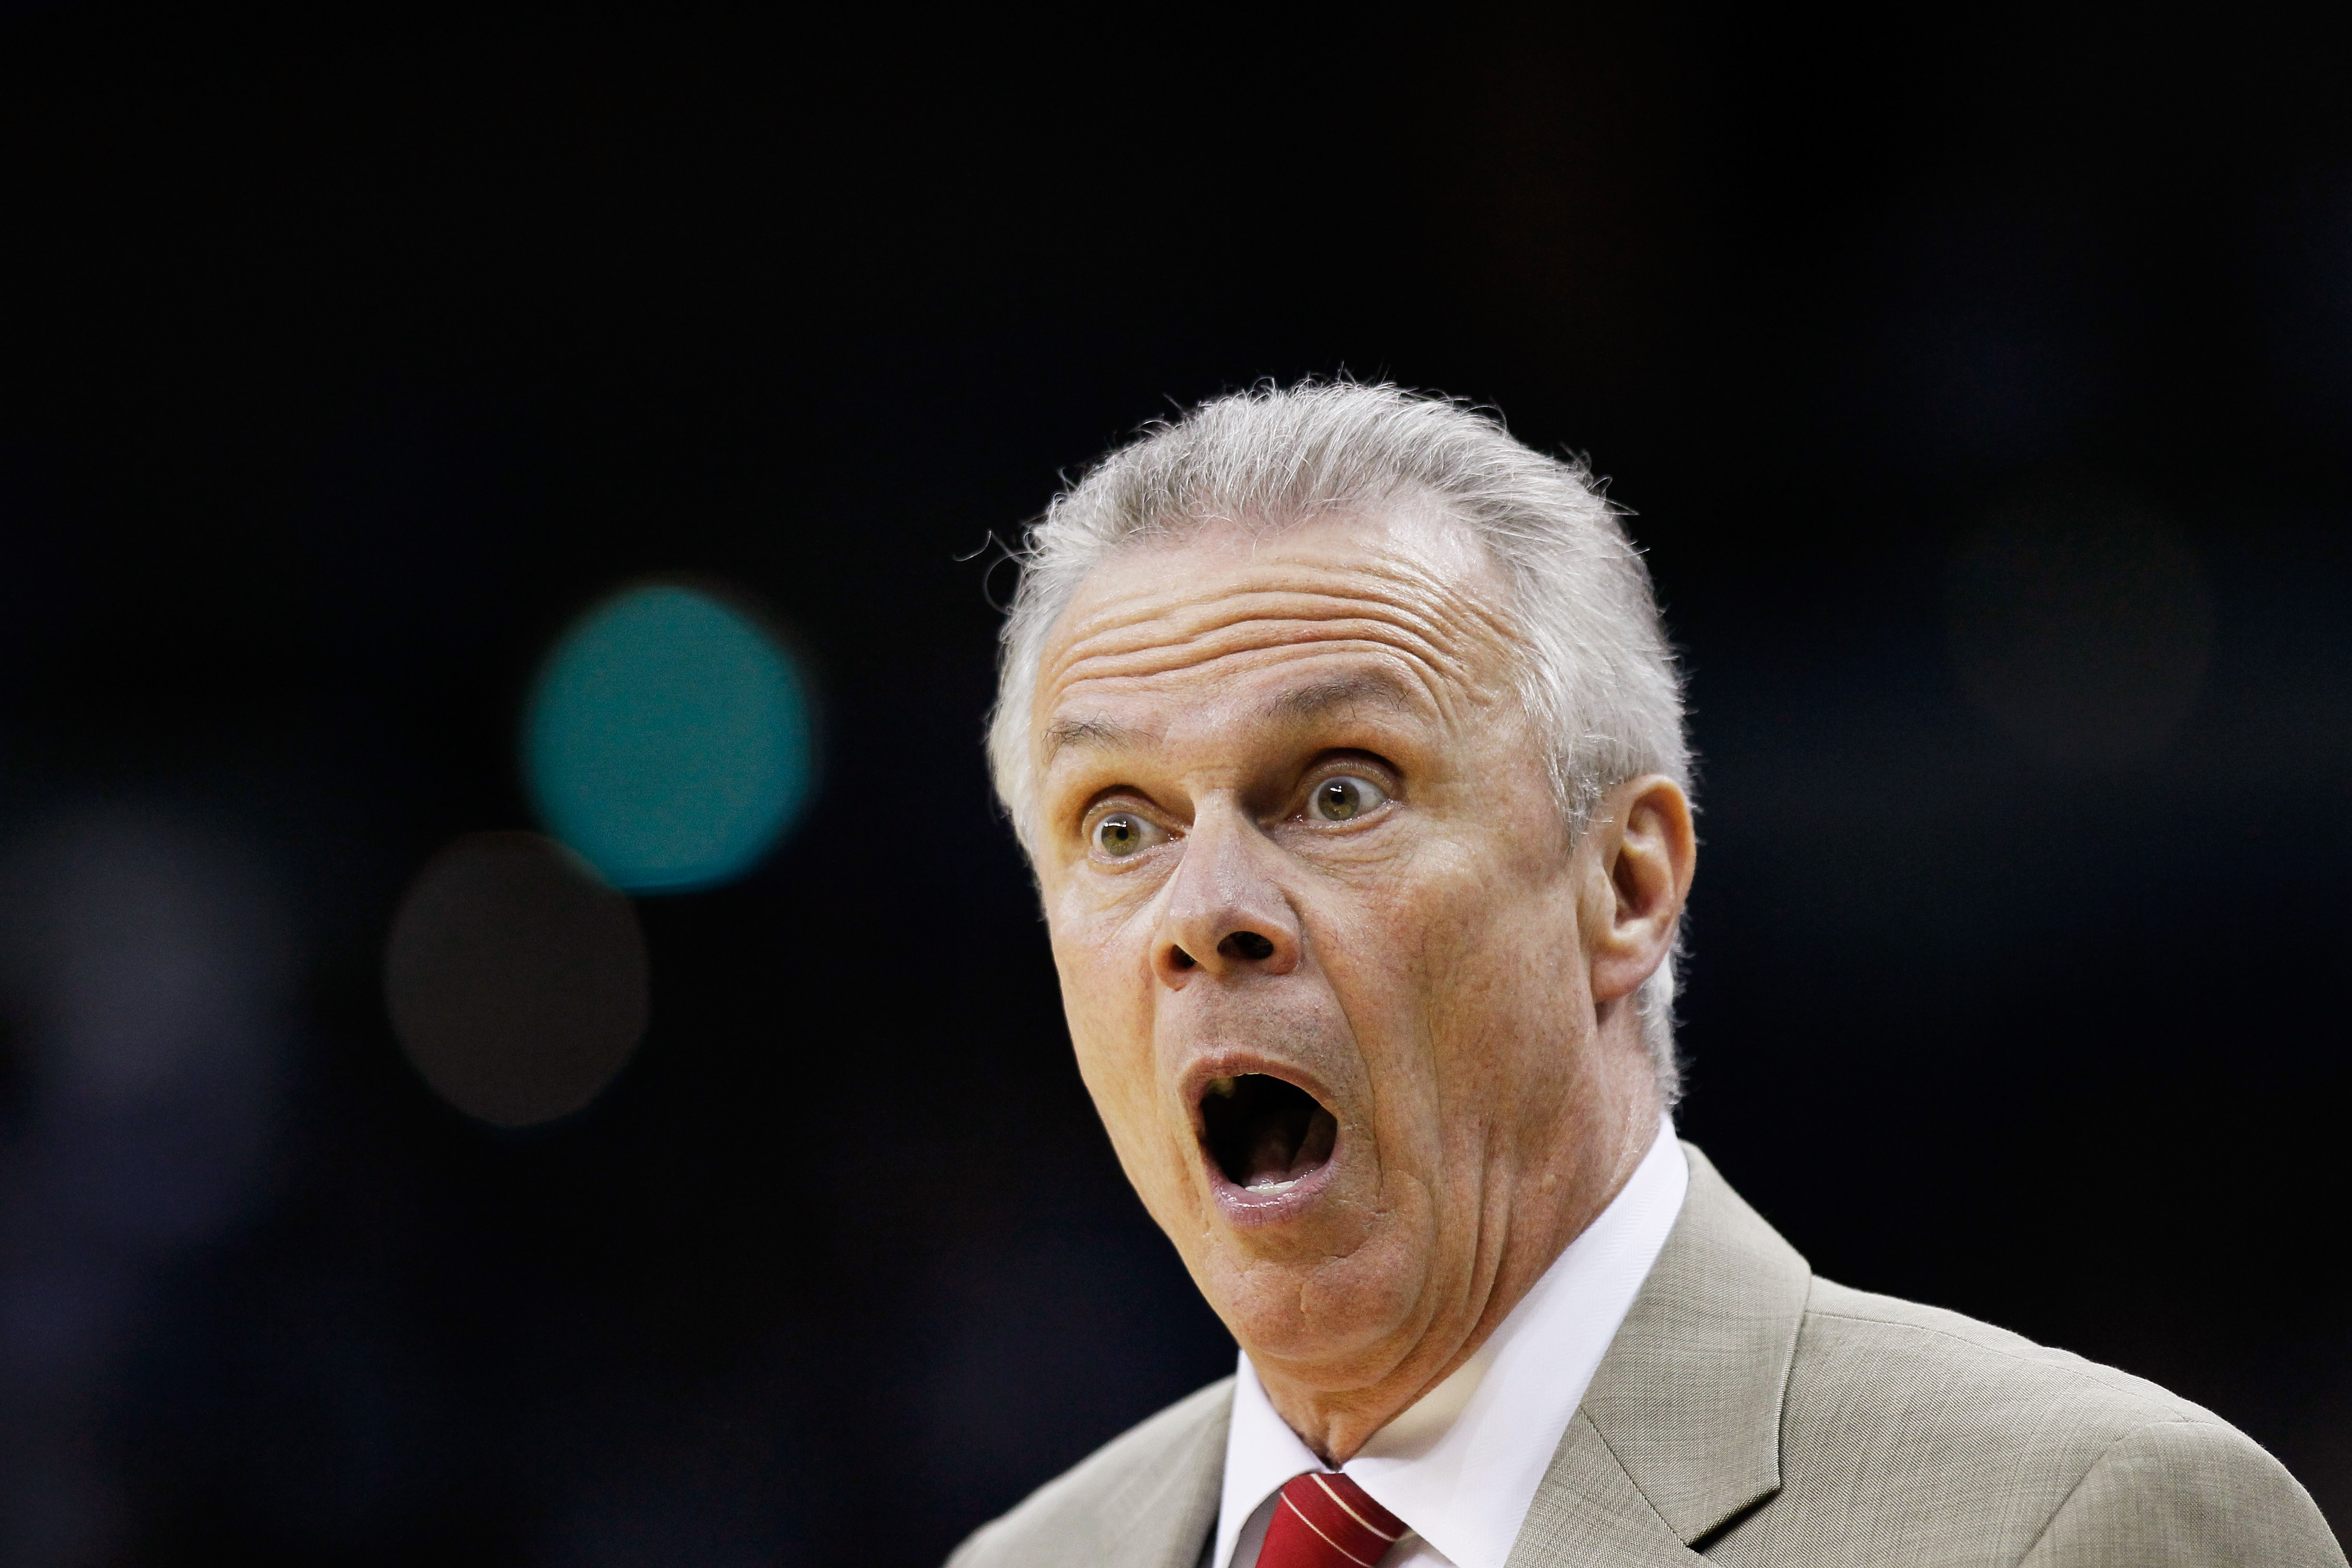 NEW ORLEANS, LA - MARCH 24:  Head coach Bo Ryan of the Wisconsin Badgers argues a call during their game against the Butler Bulldogs in the Southeast regional of the 2011 NCAA men's basketball tournament at New Orleans Arena on March 24, 2011 in New Orlea